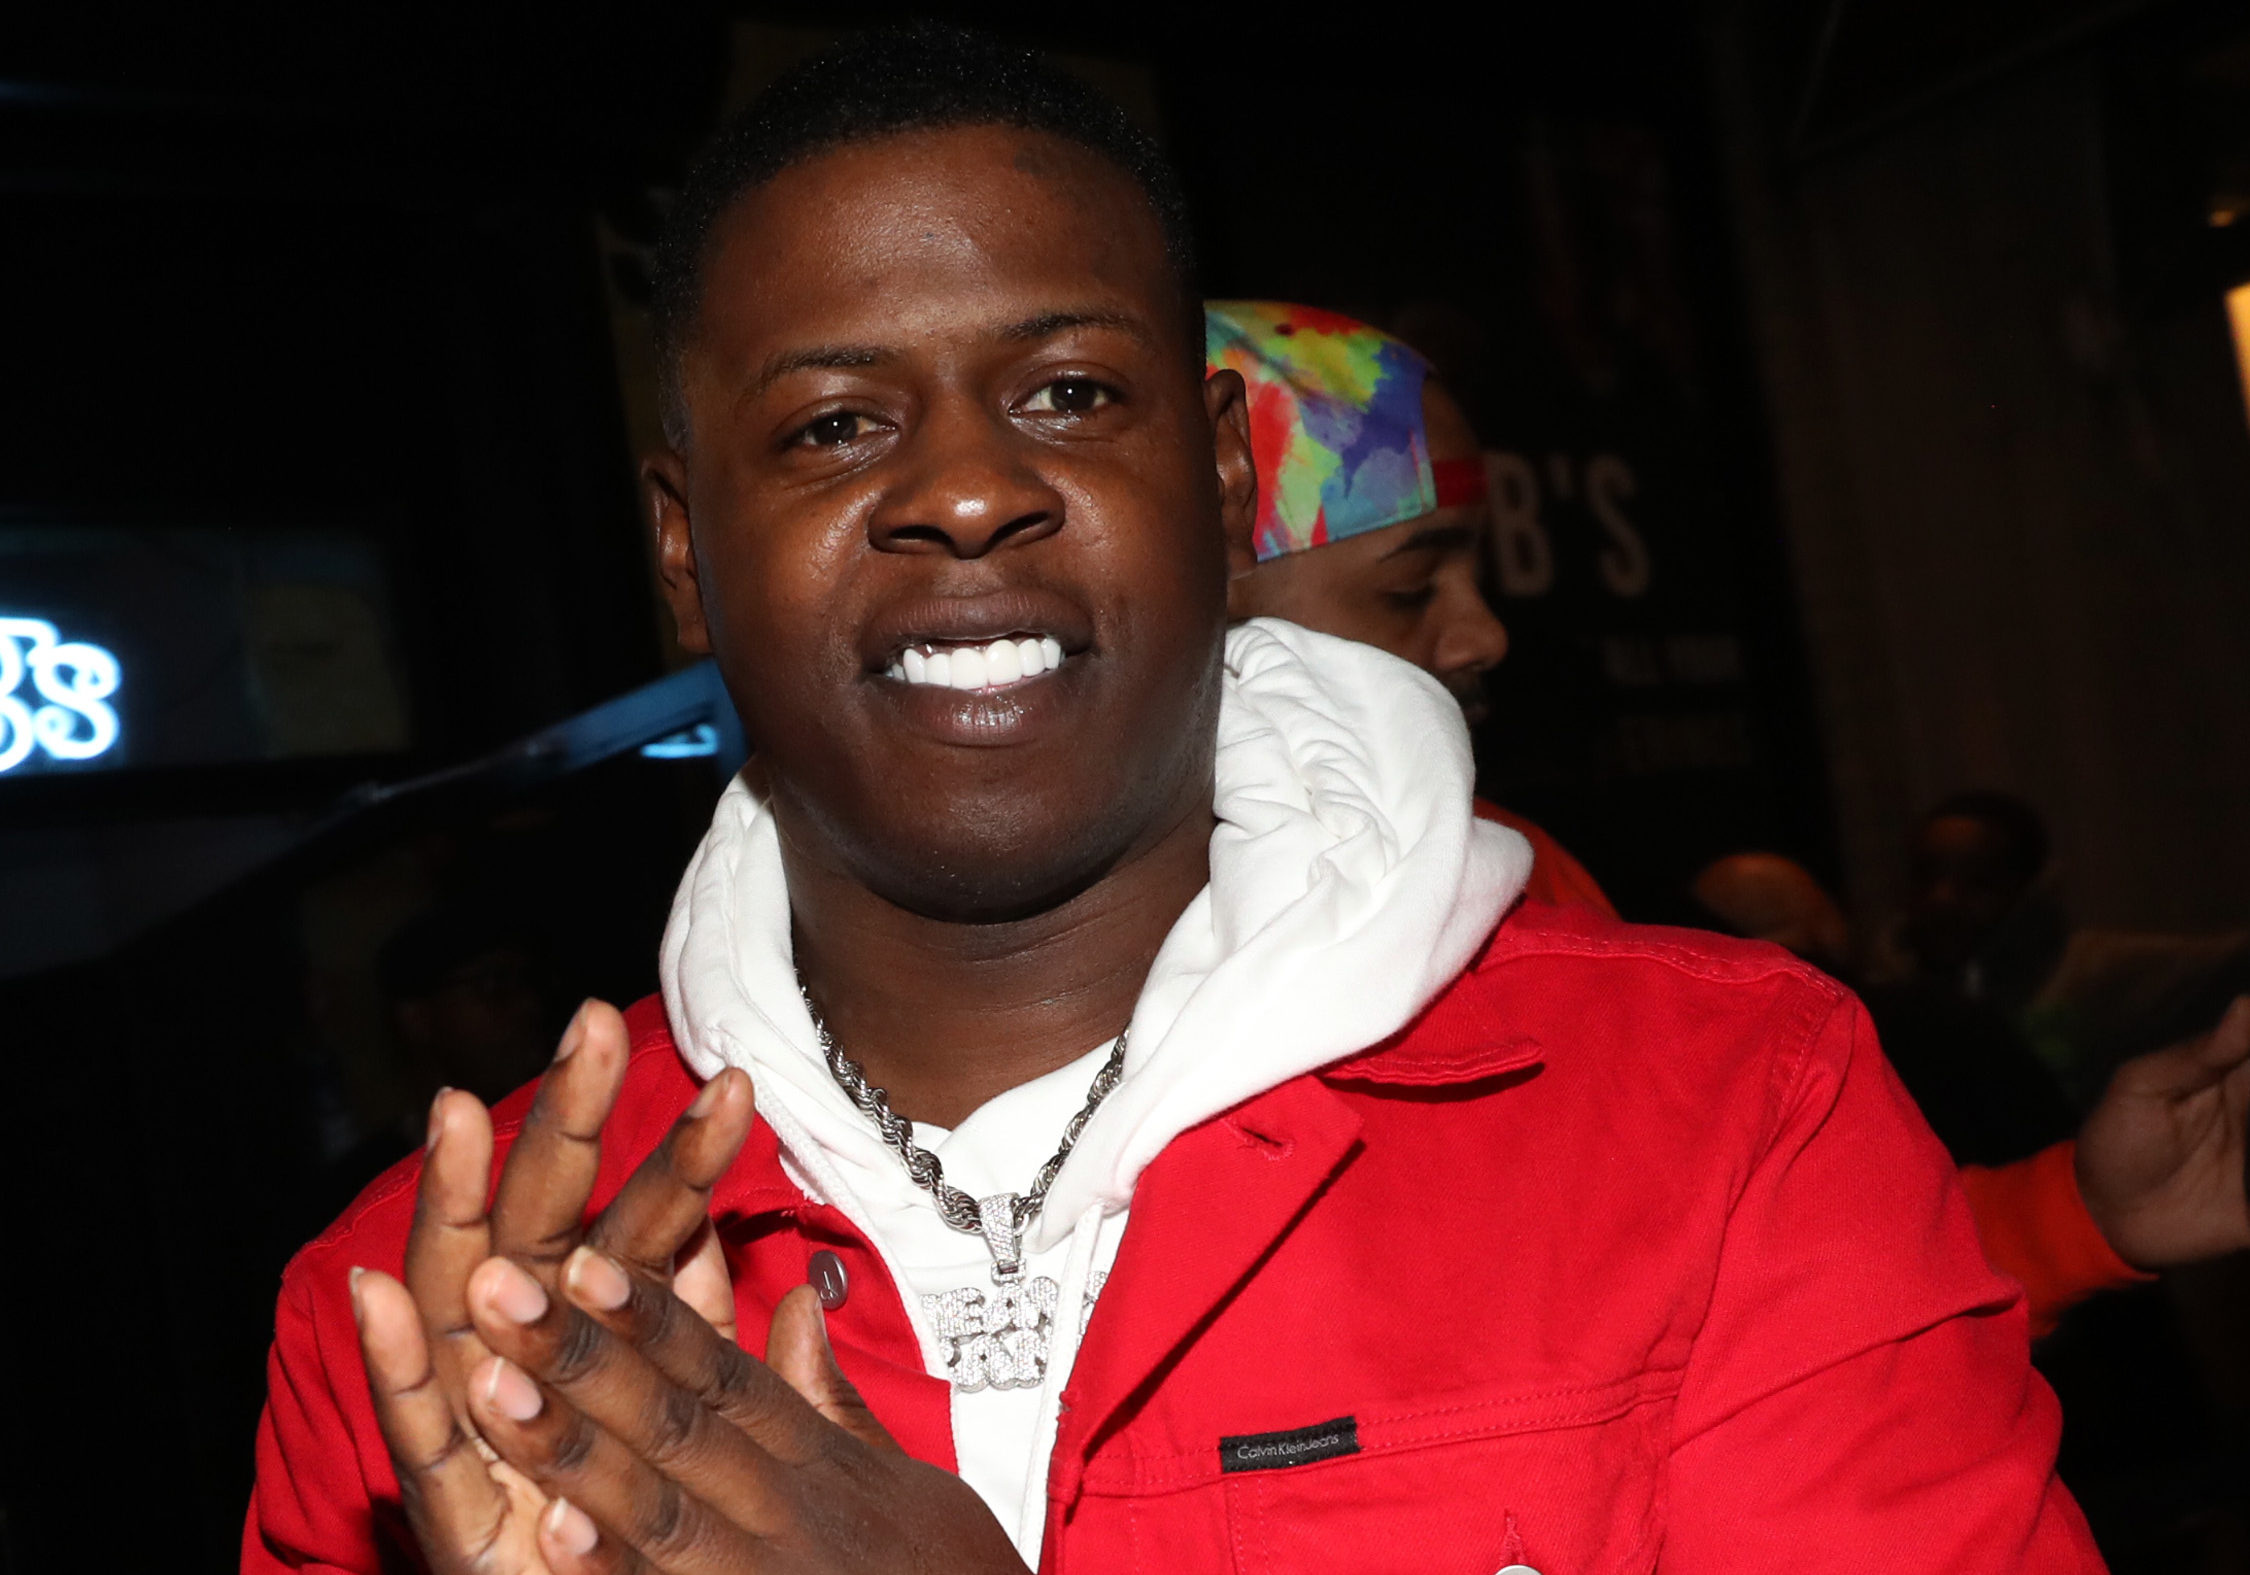 Blac Youngsta's arrest, Weapon charge, Houston legal drama, Troubling incident, 2250x1580 HD Desktop